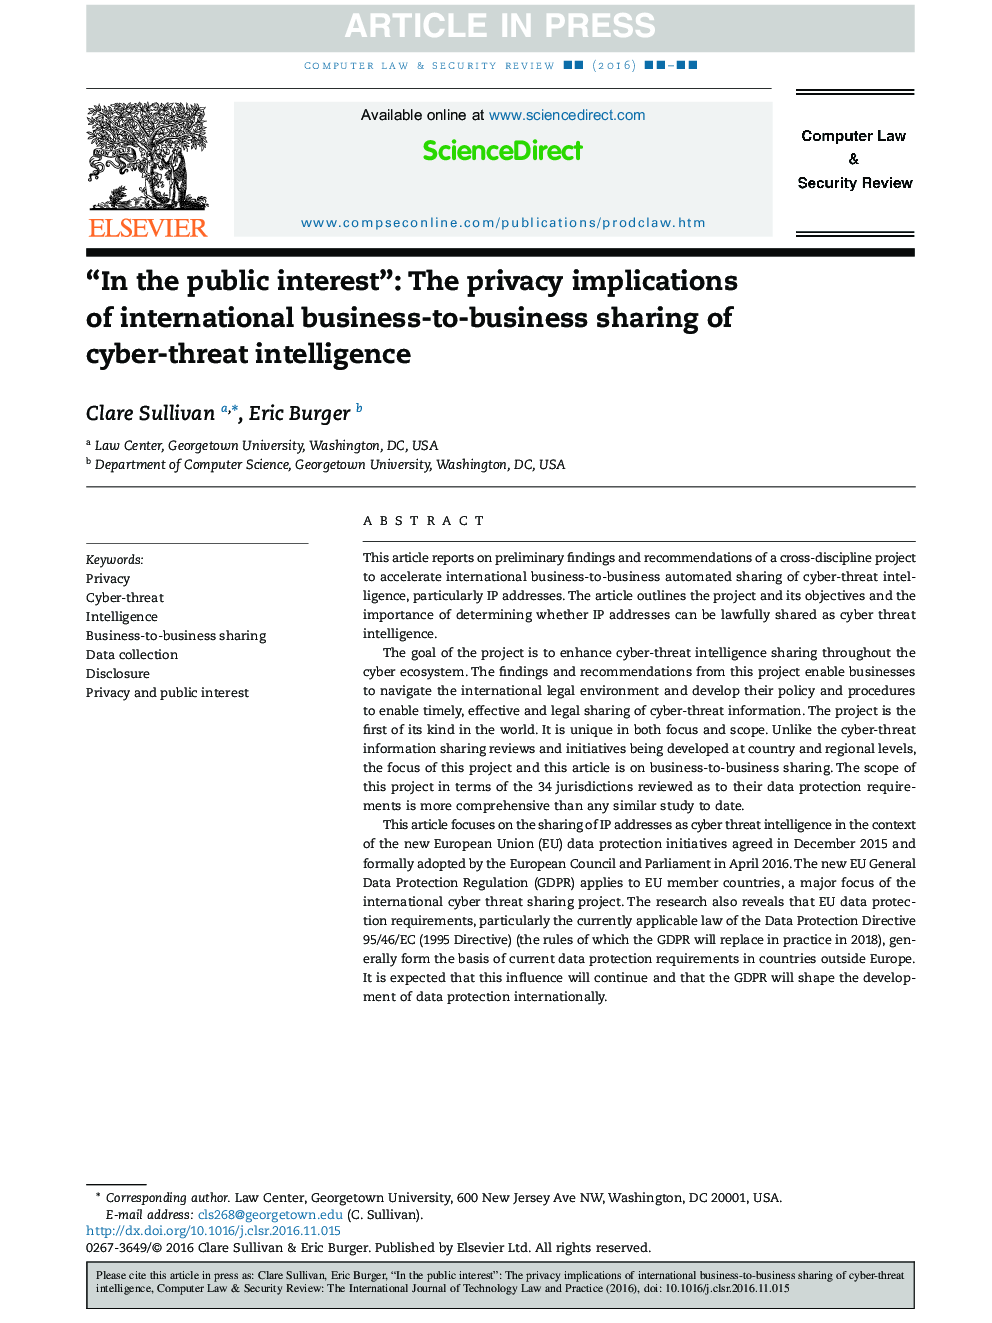 “In the public interest”: The privacy implications of international business-to-business sharing of cyber-threat intelligence